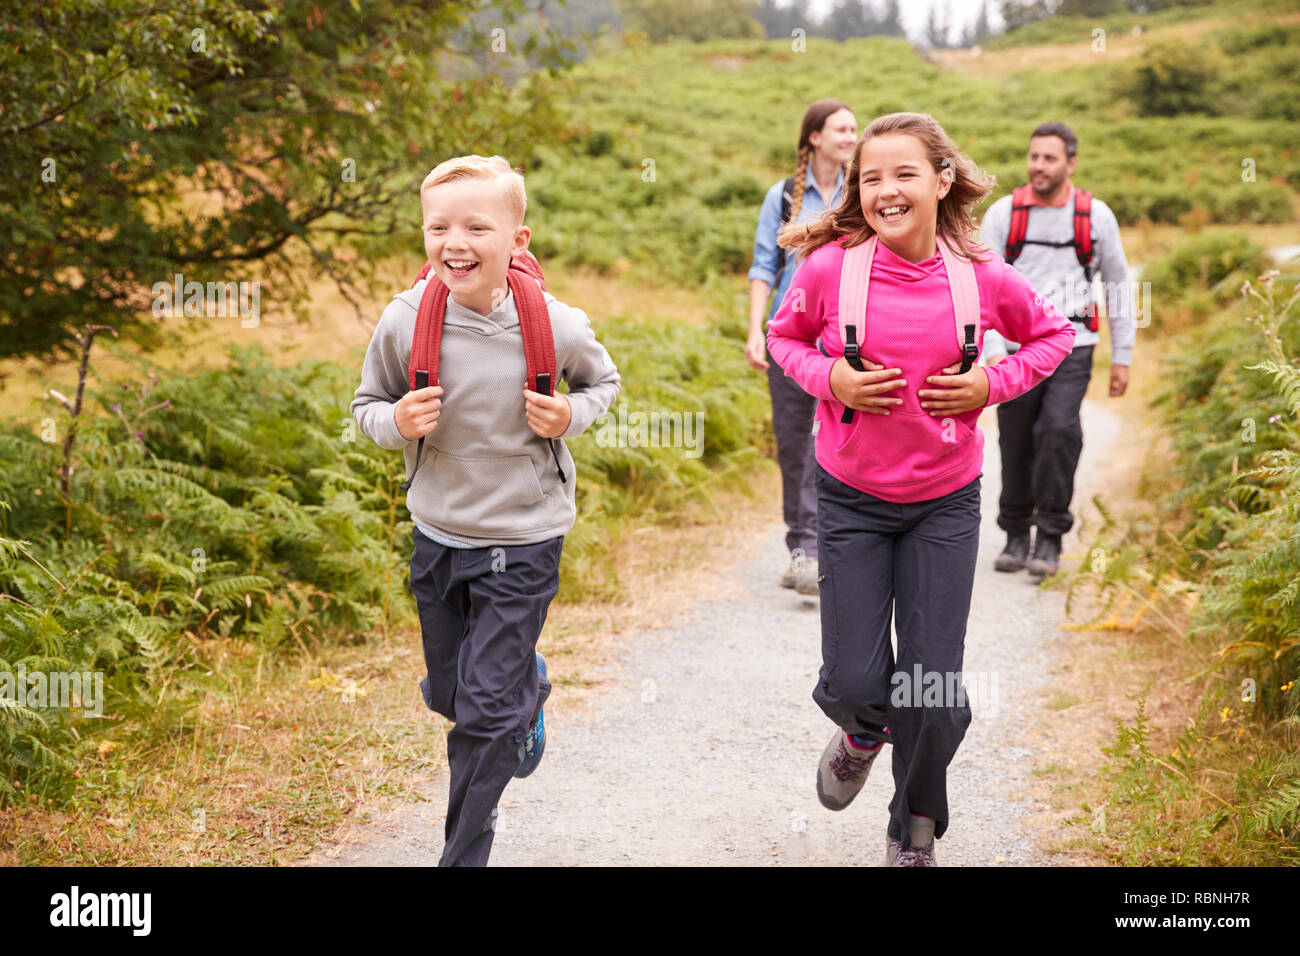 Close up of children running ahead of parents on a country path during a family vacation, front view Stock Photo